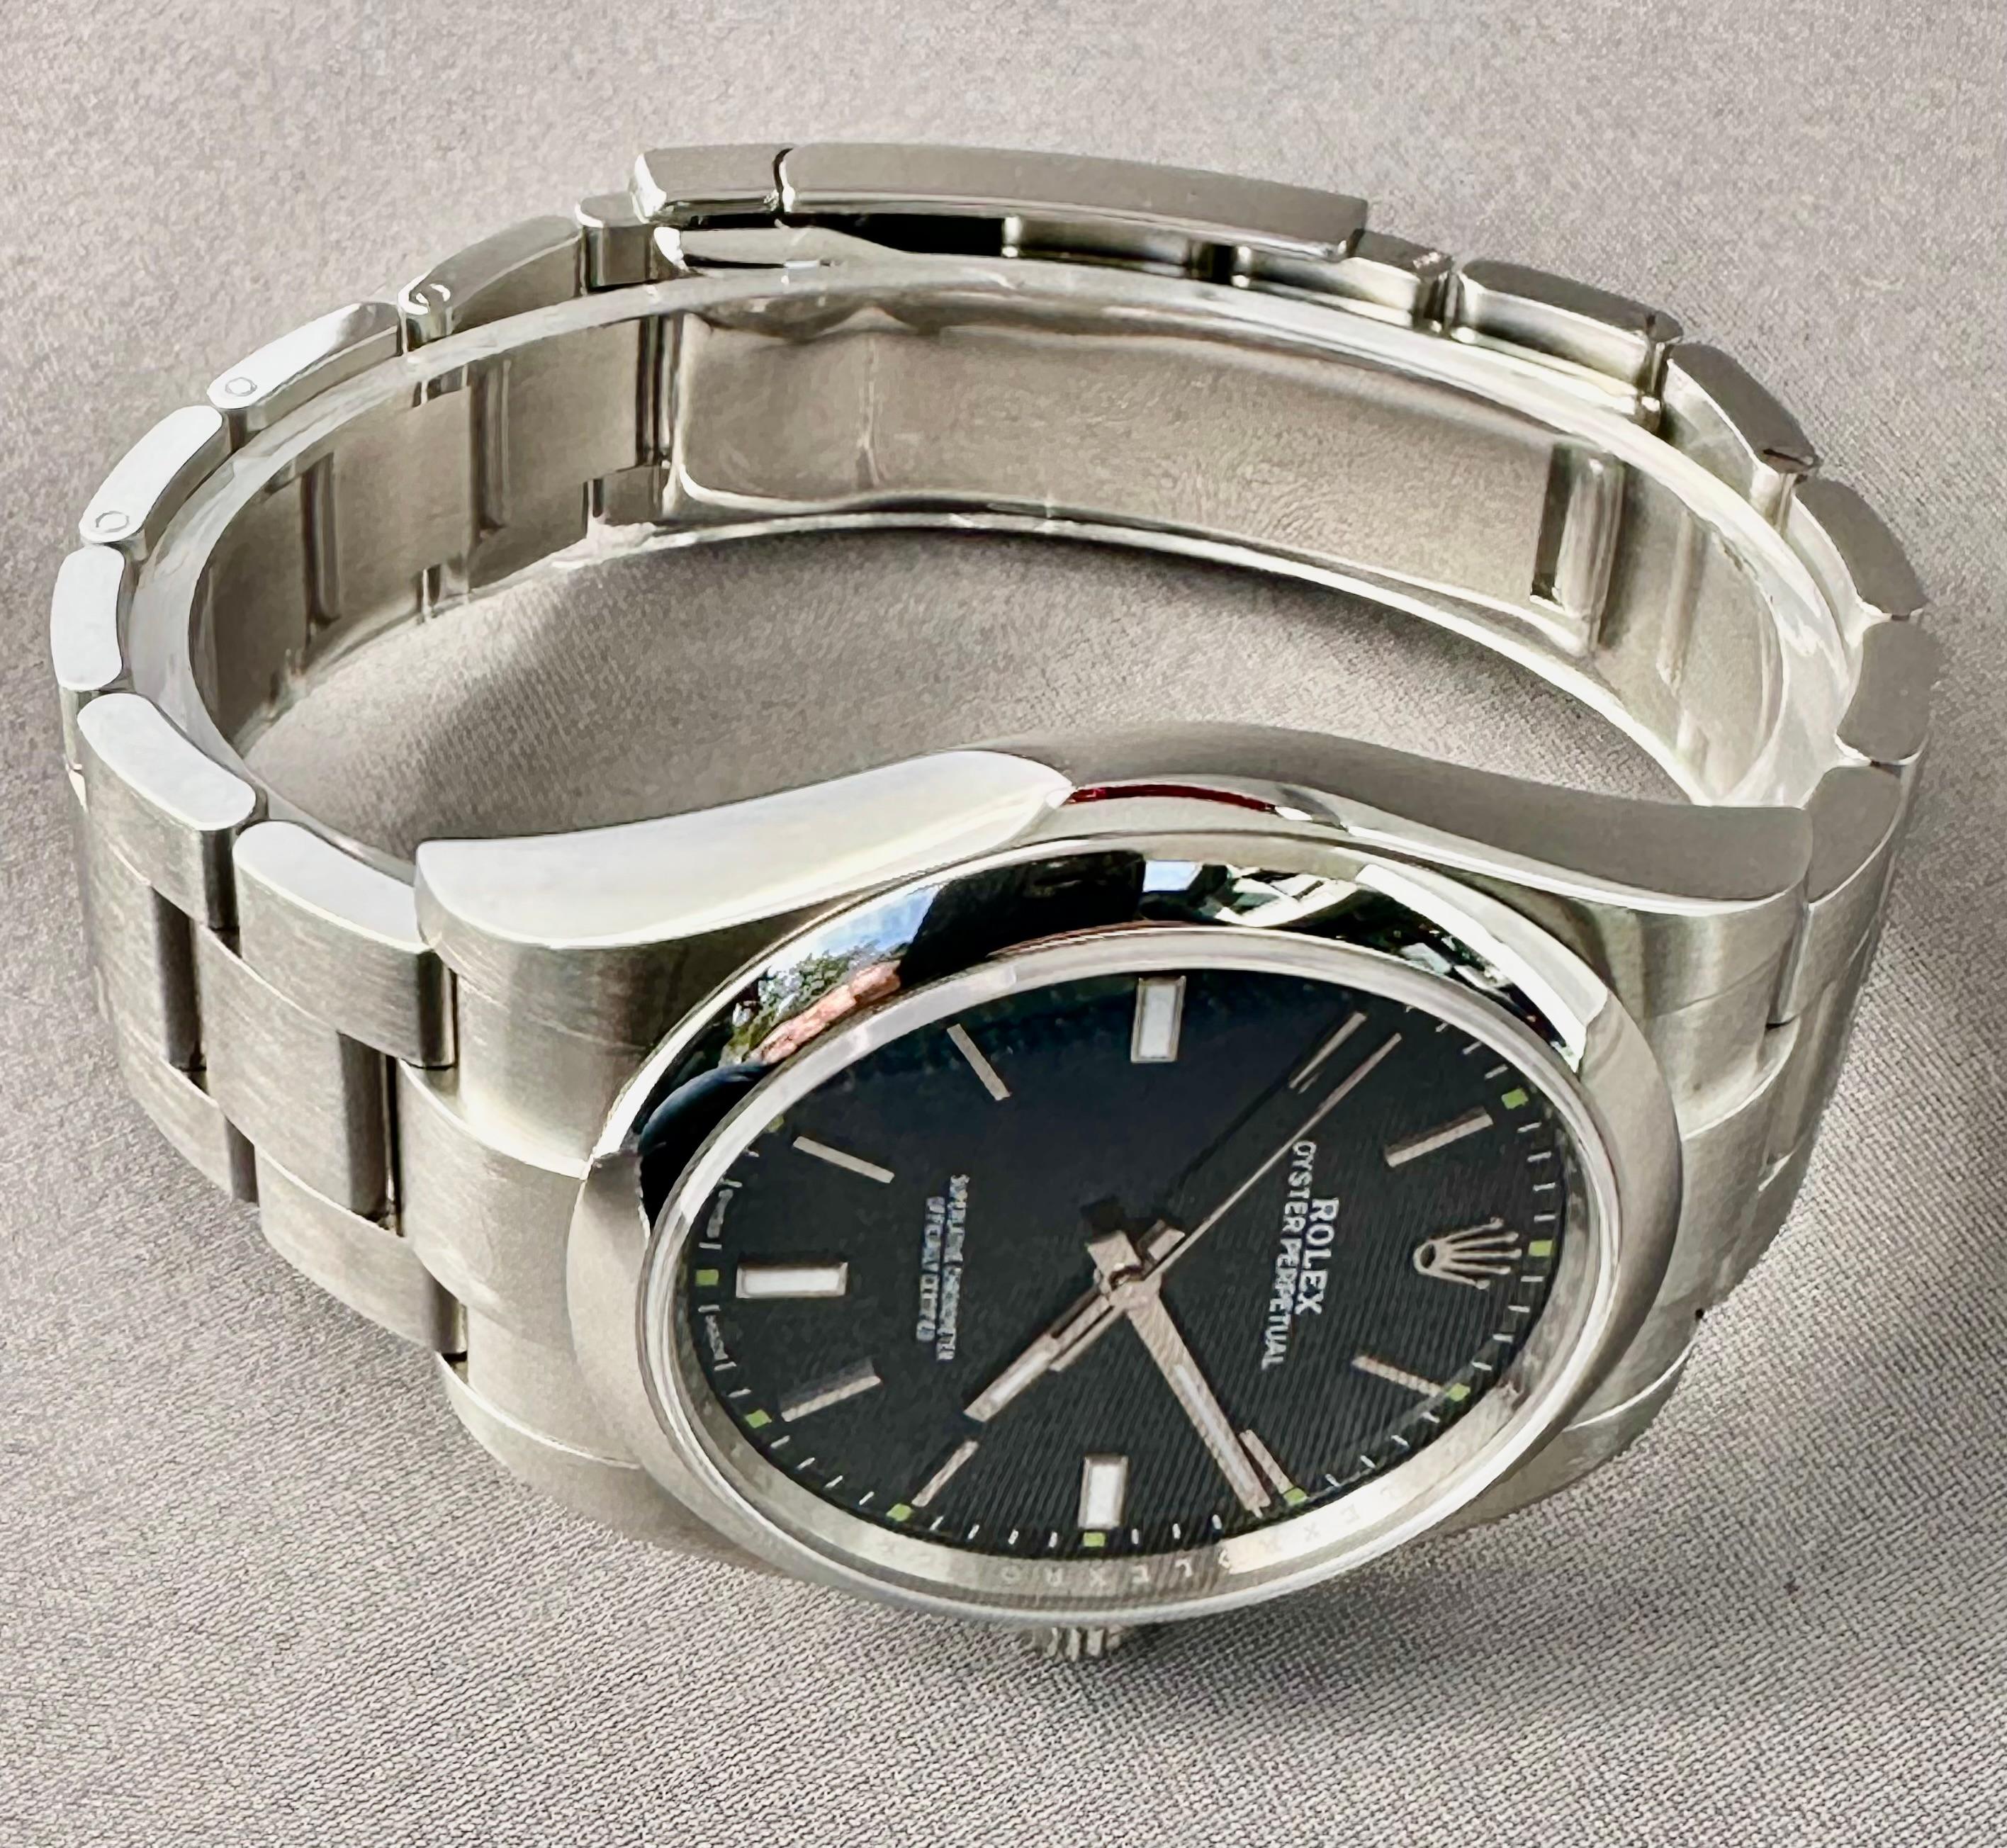 
Rolex Oyster Perpetual Chronometer Ref. # 114300



Description / Condition: All watches have been professionally scrutinized and serviced prior to being offered for sale. Superlative, fine condition. 

Manufacturer: Rolex

Model: Rolex Oyster